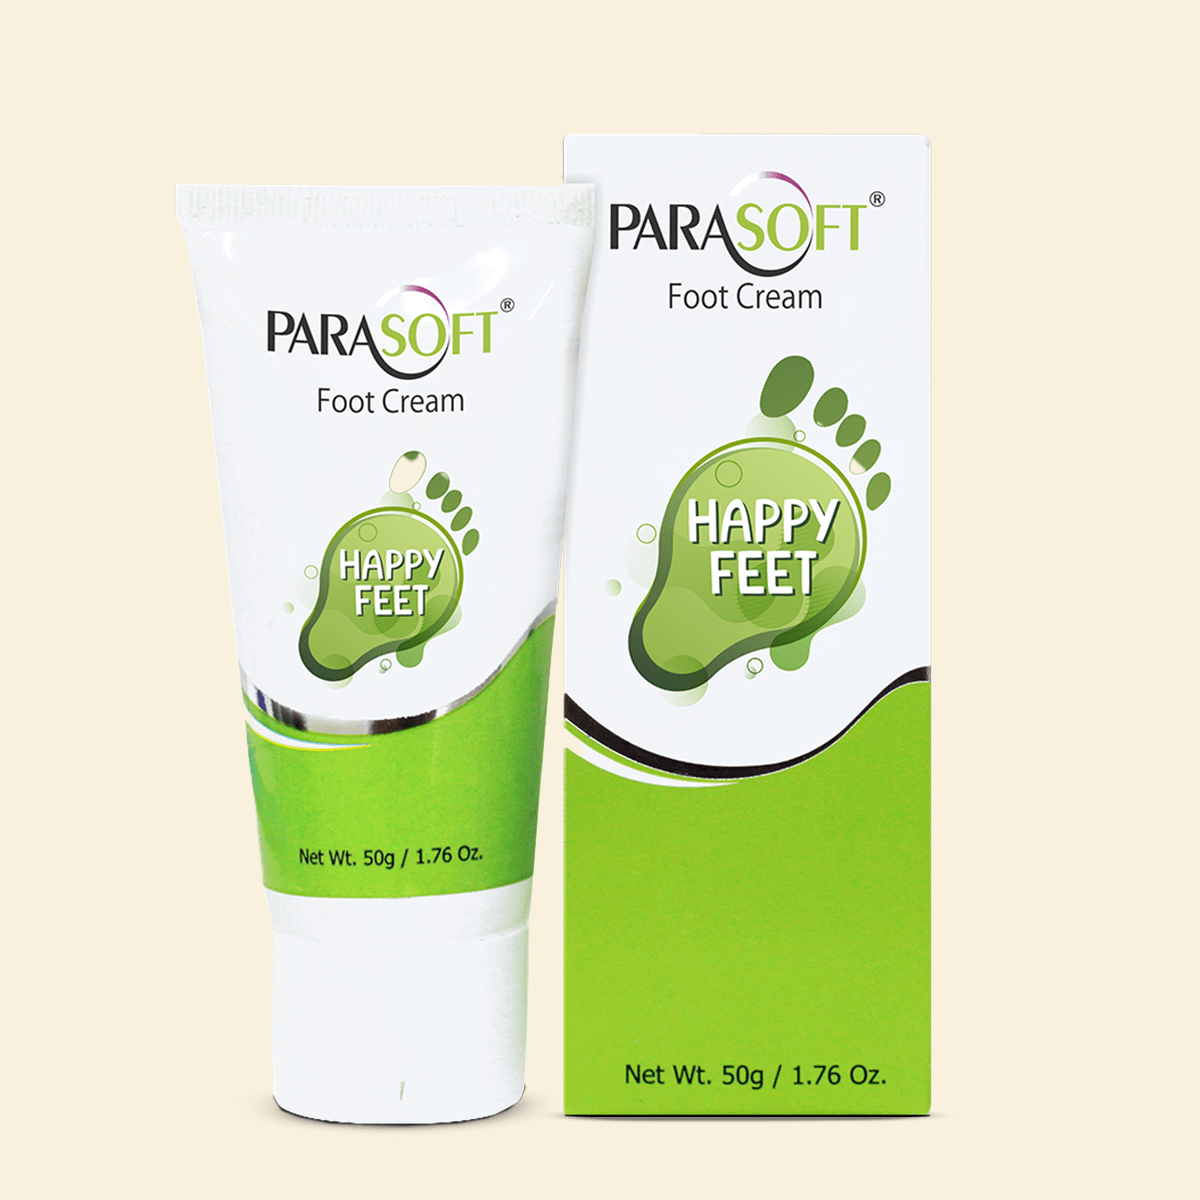 Shoprythm Parasoft,Body & Foot Cream Pack of 1 Salve Parasoft Happy Feet Foot Cream for Cracked heels and Athlete's Foot 50g